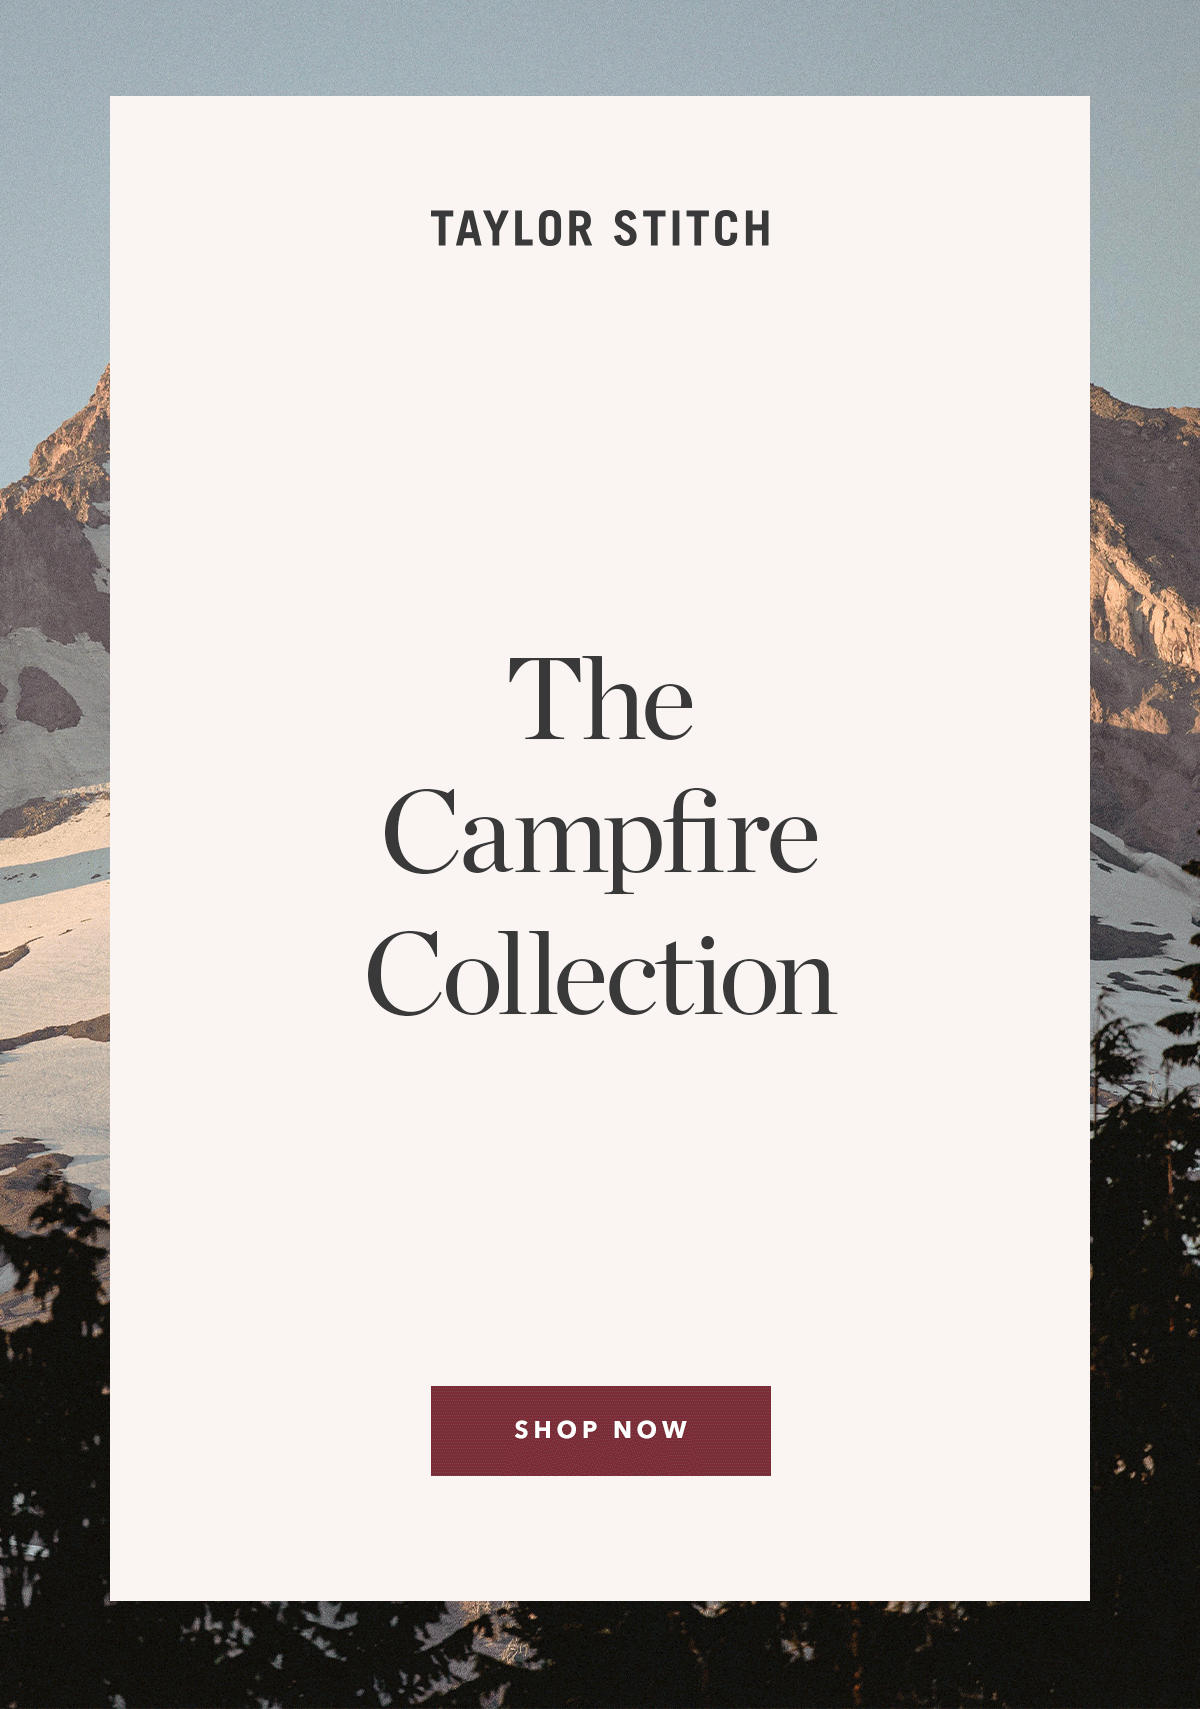 The Campfire Collection: Shop Now